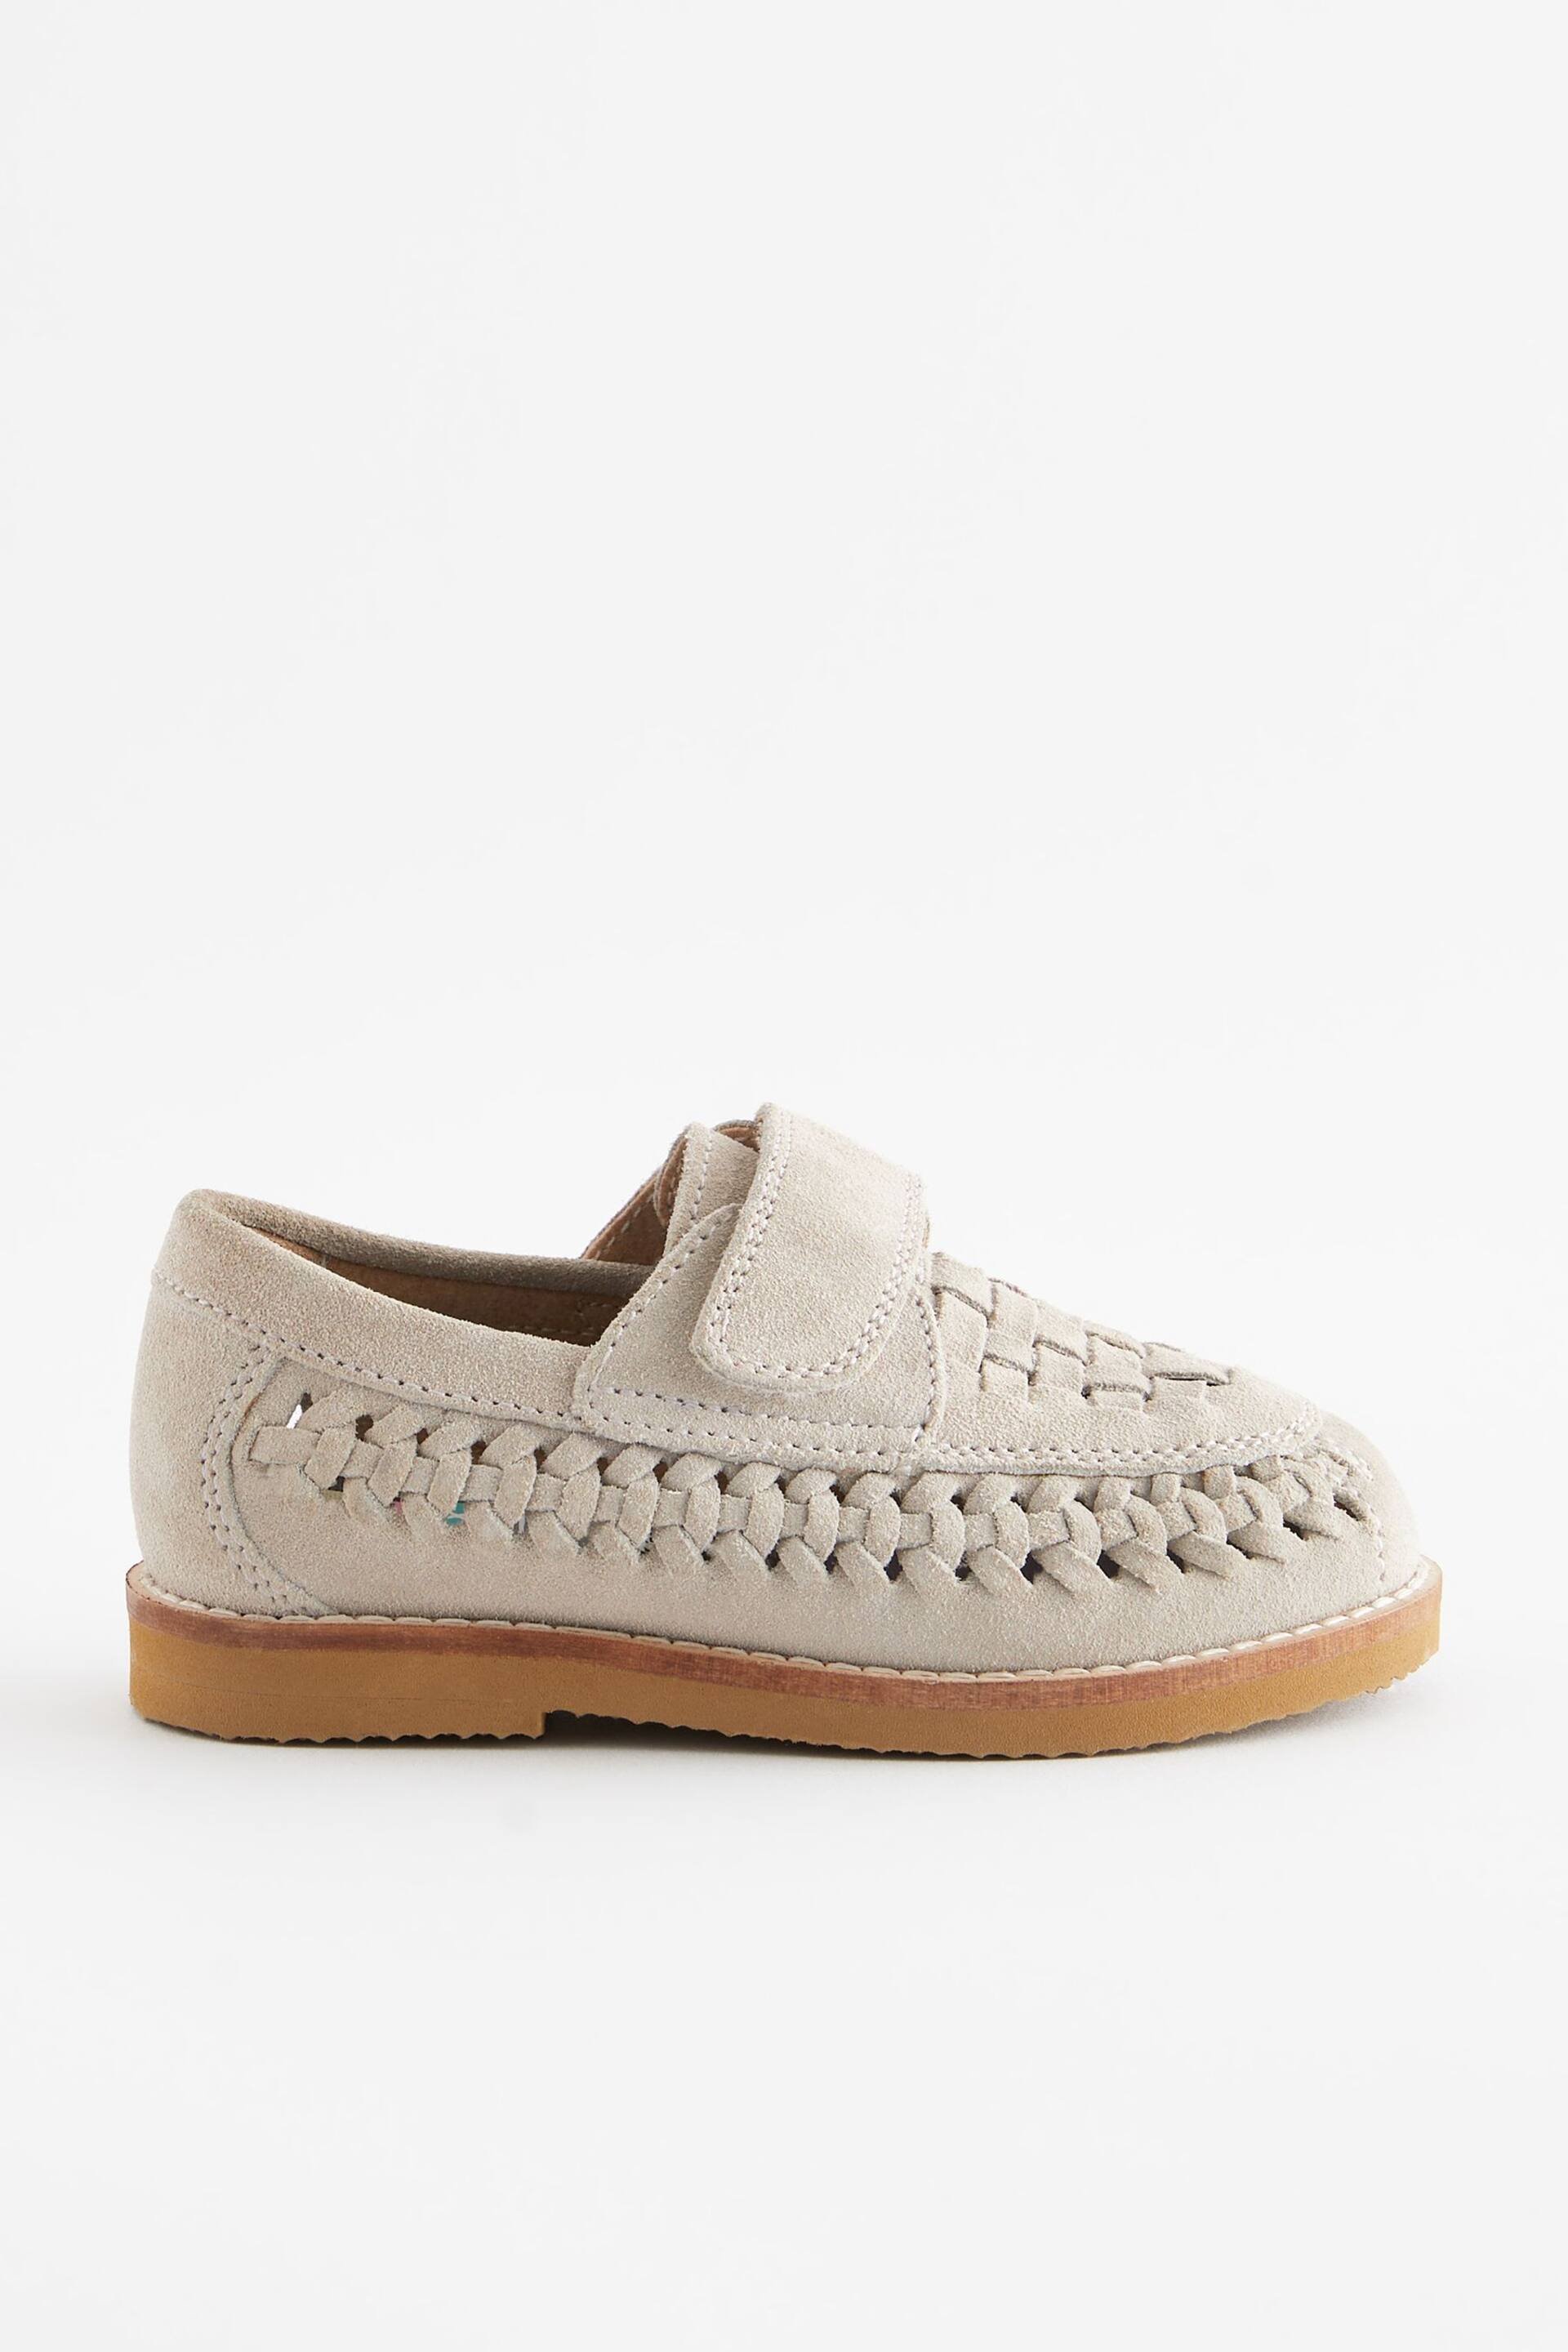 Stone Neutral Woven Loafers - Image 3 of 5